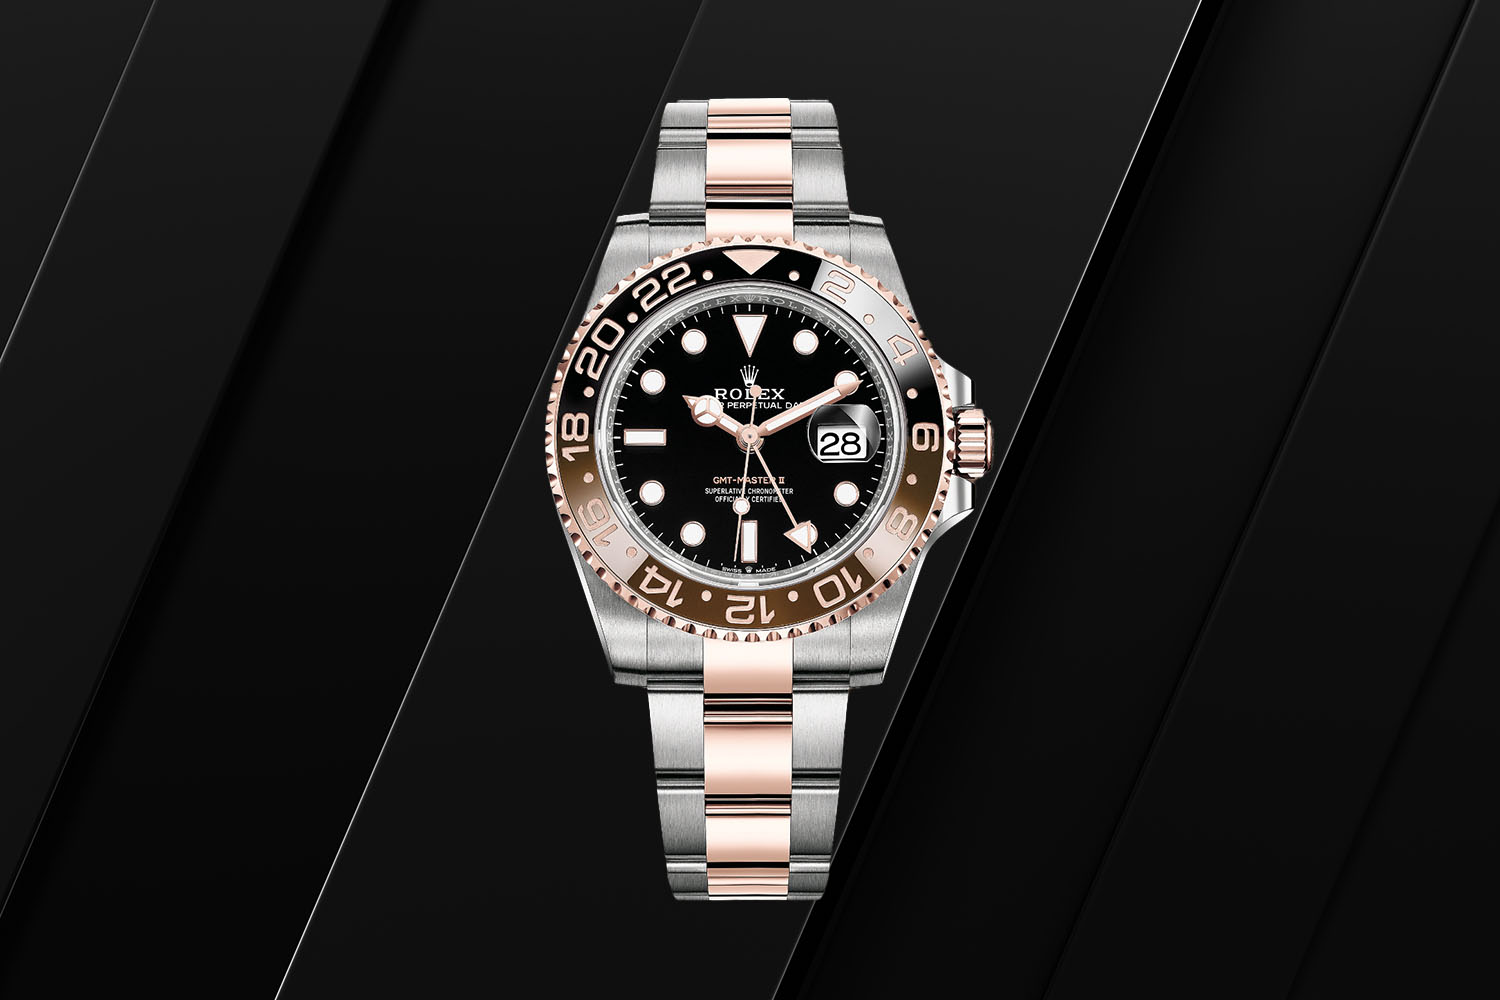 The Rolex GMT Master II on a black background